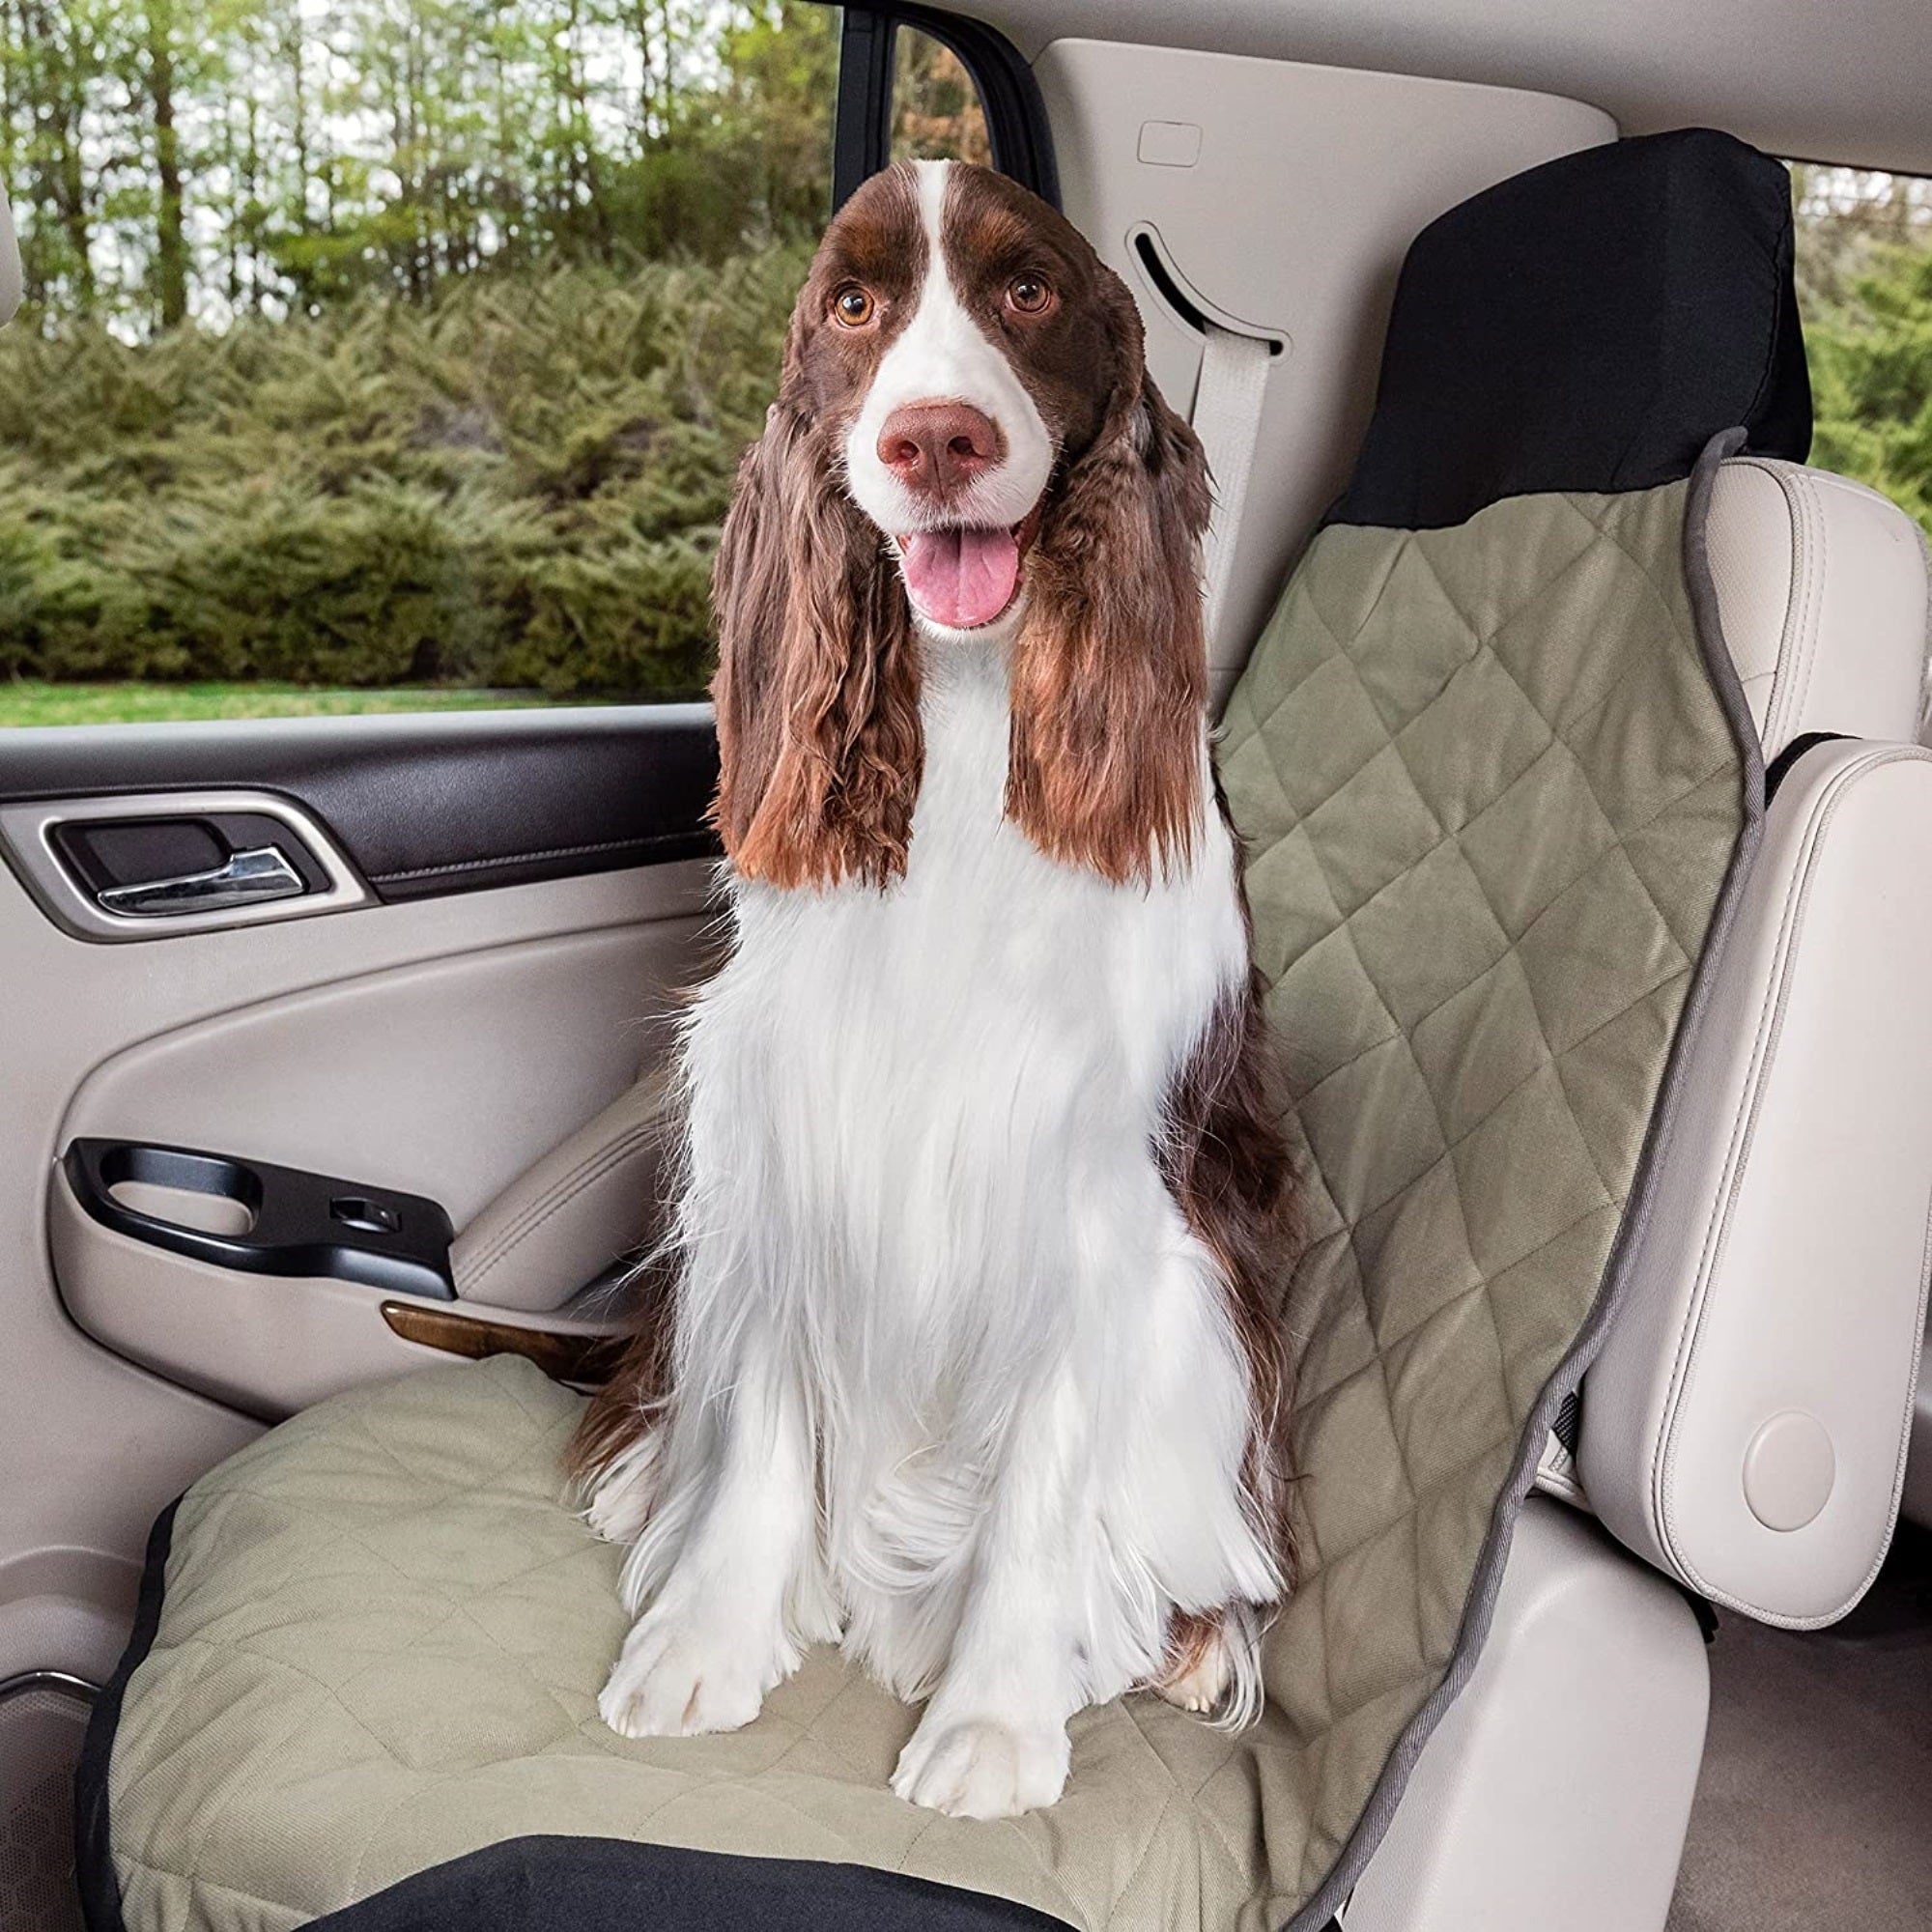 PetSafe Happy Ride Seat Cover, Waterproof, Fits Most Vehicles, Green